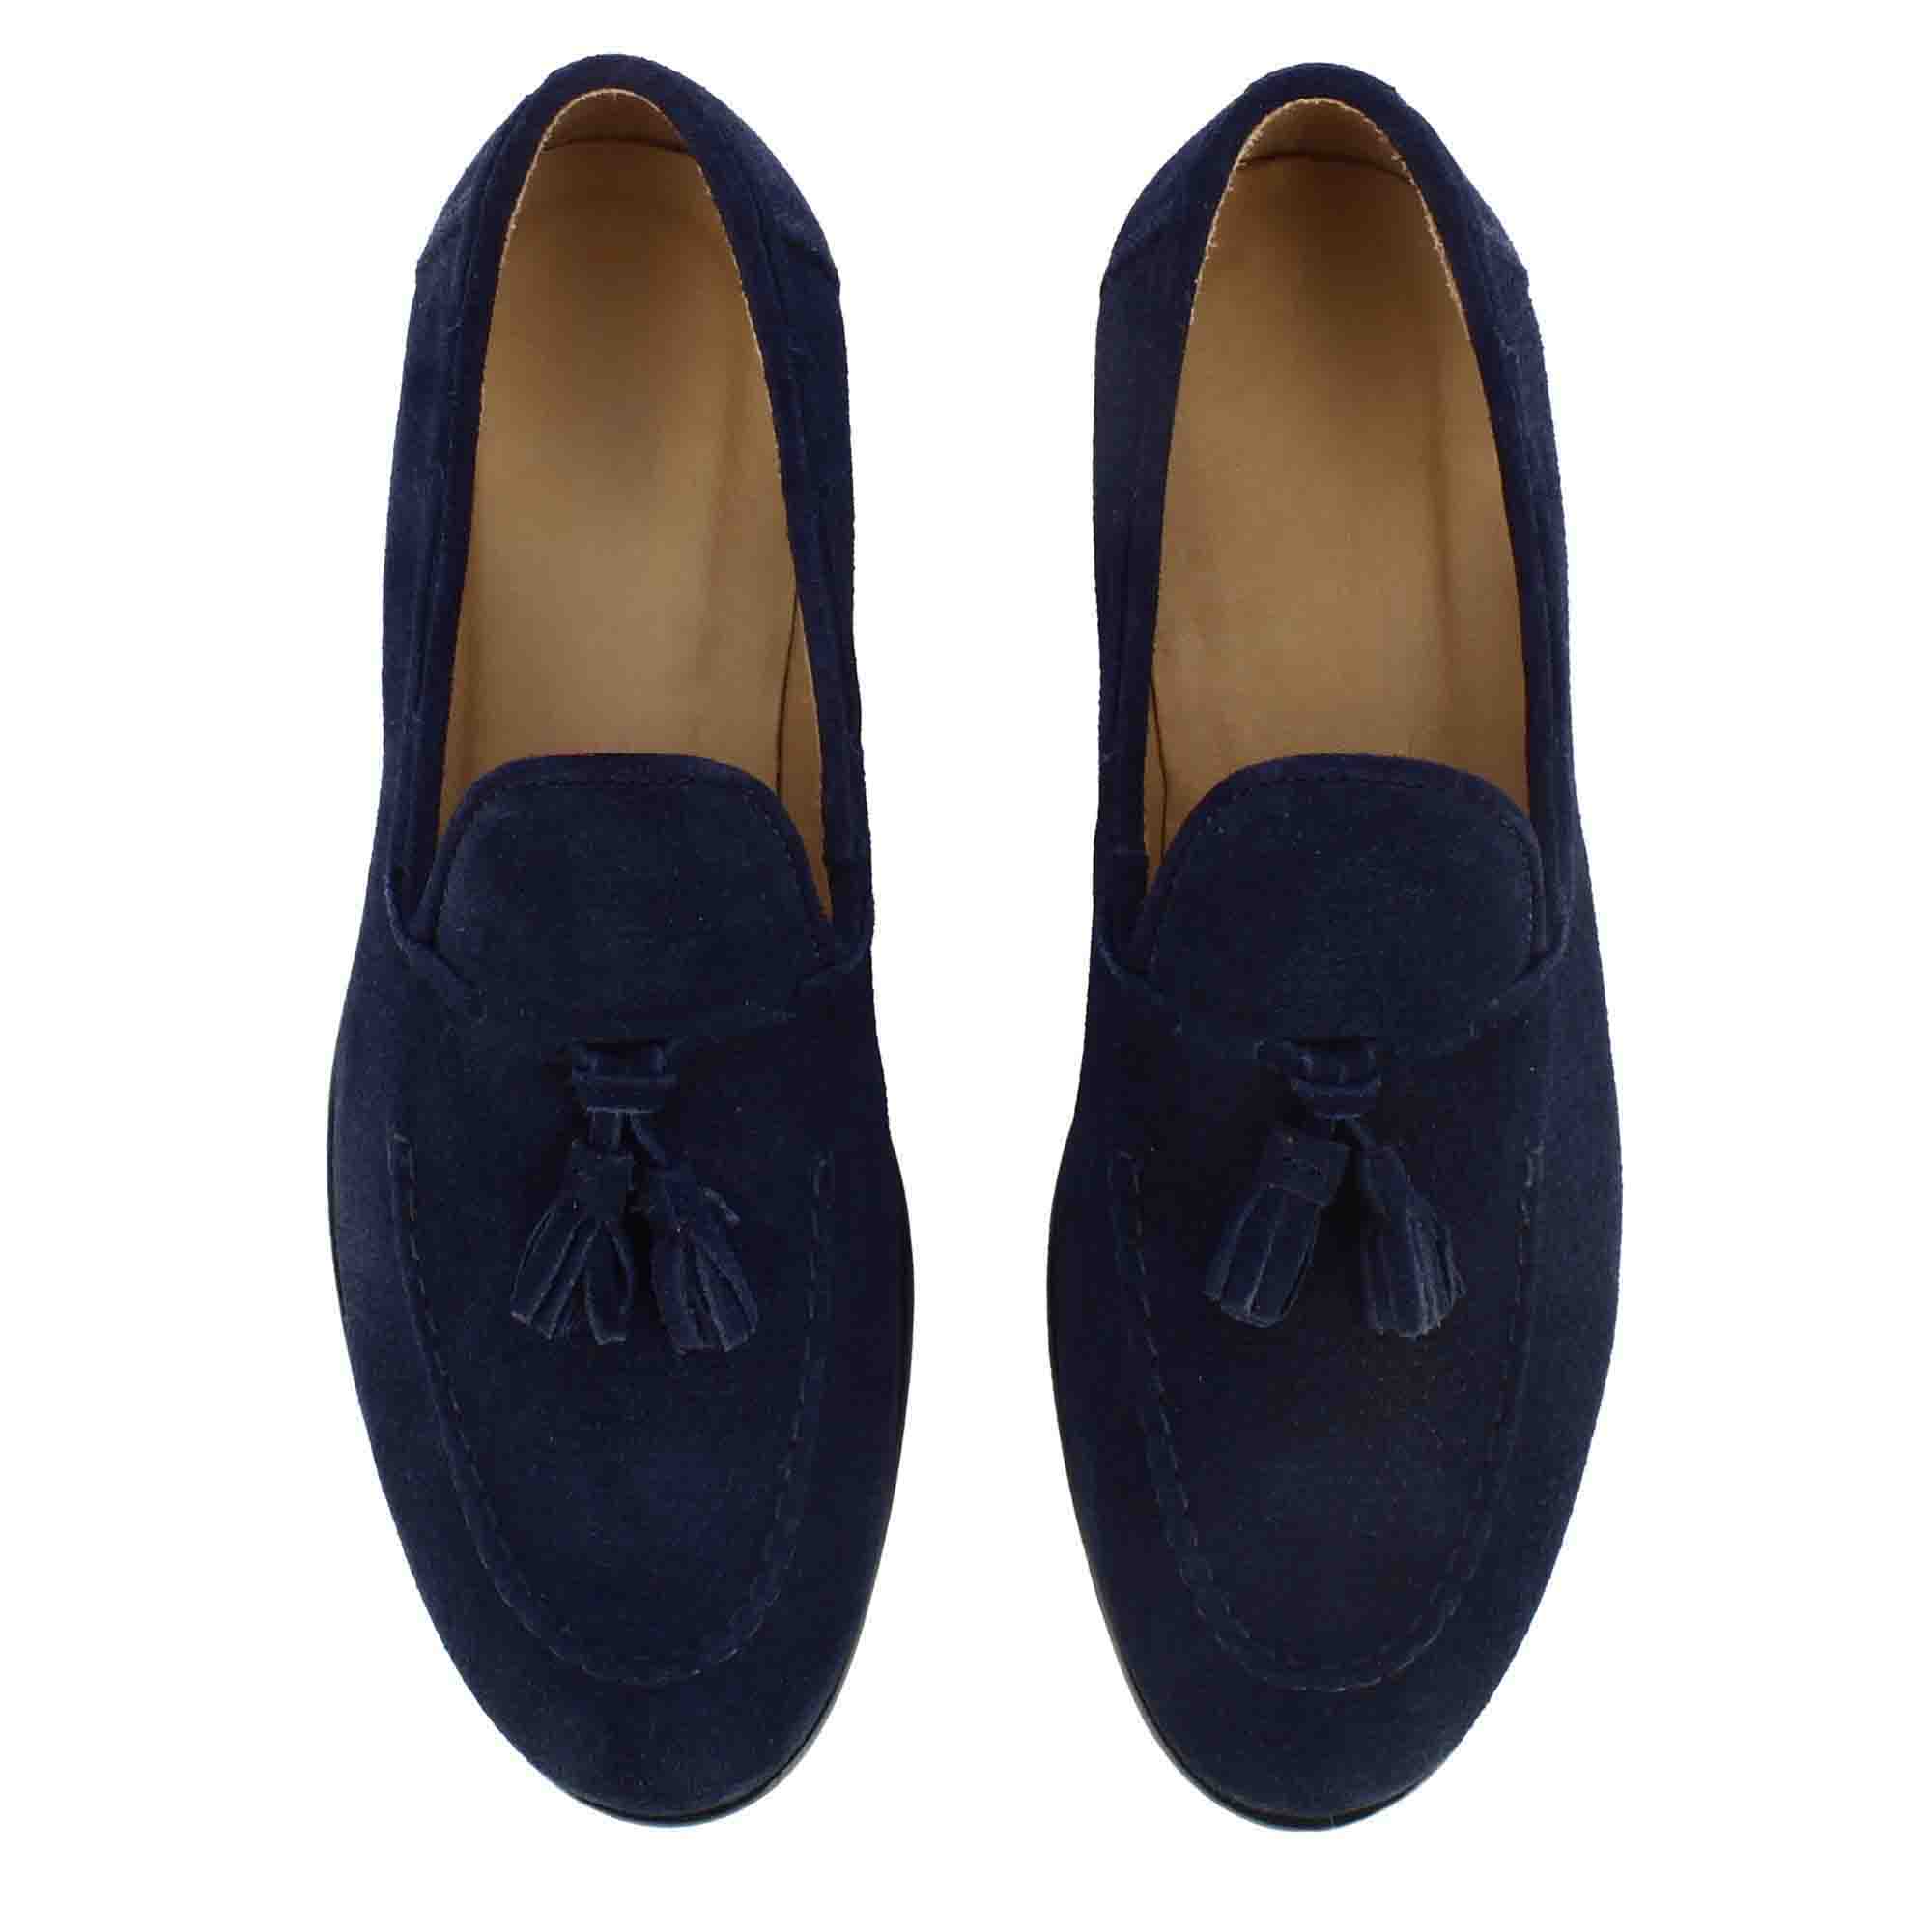 Suede Moccasin with Blue Tassels